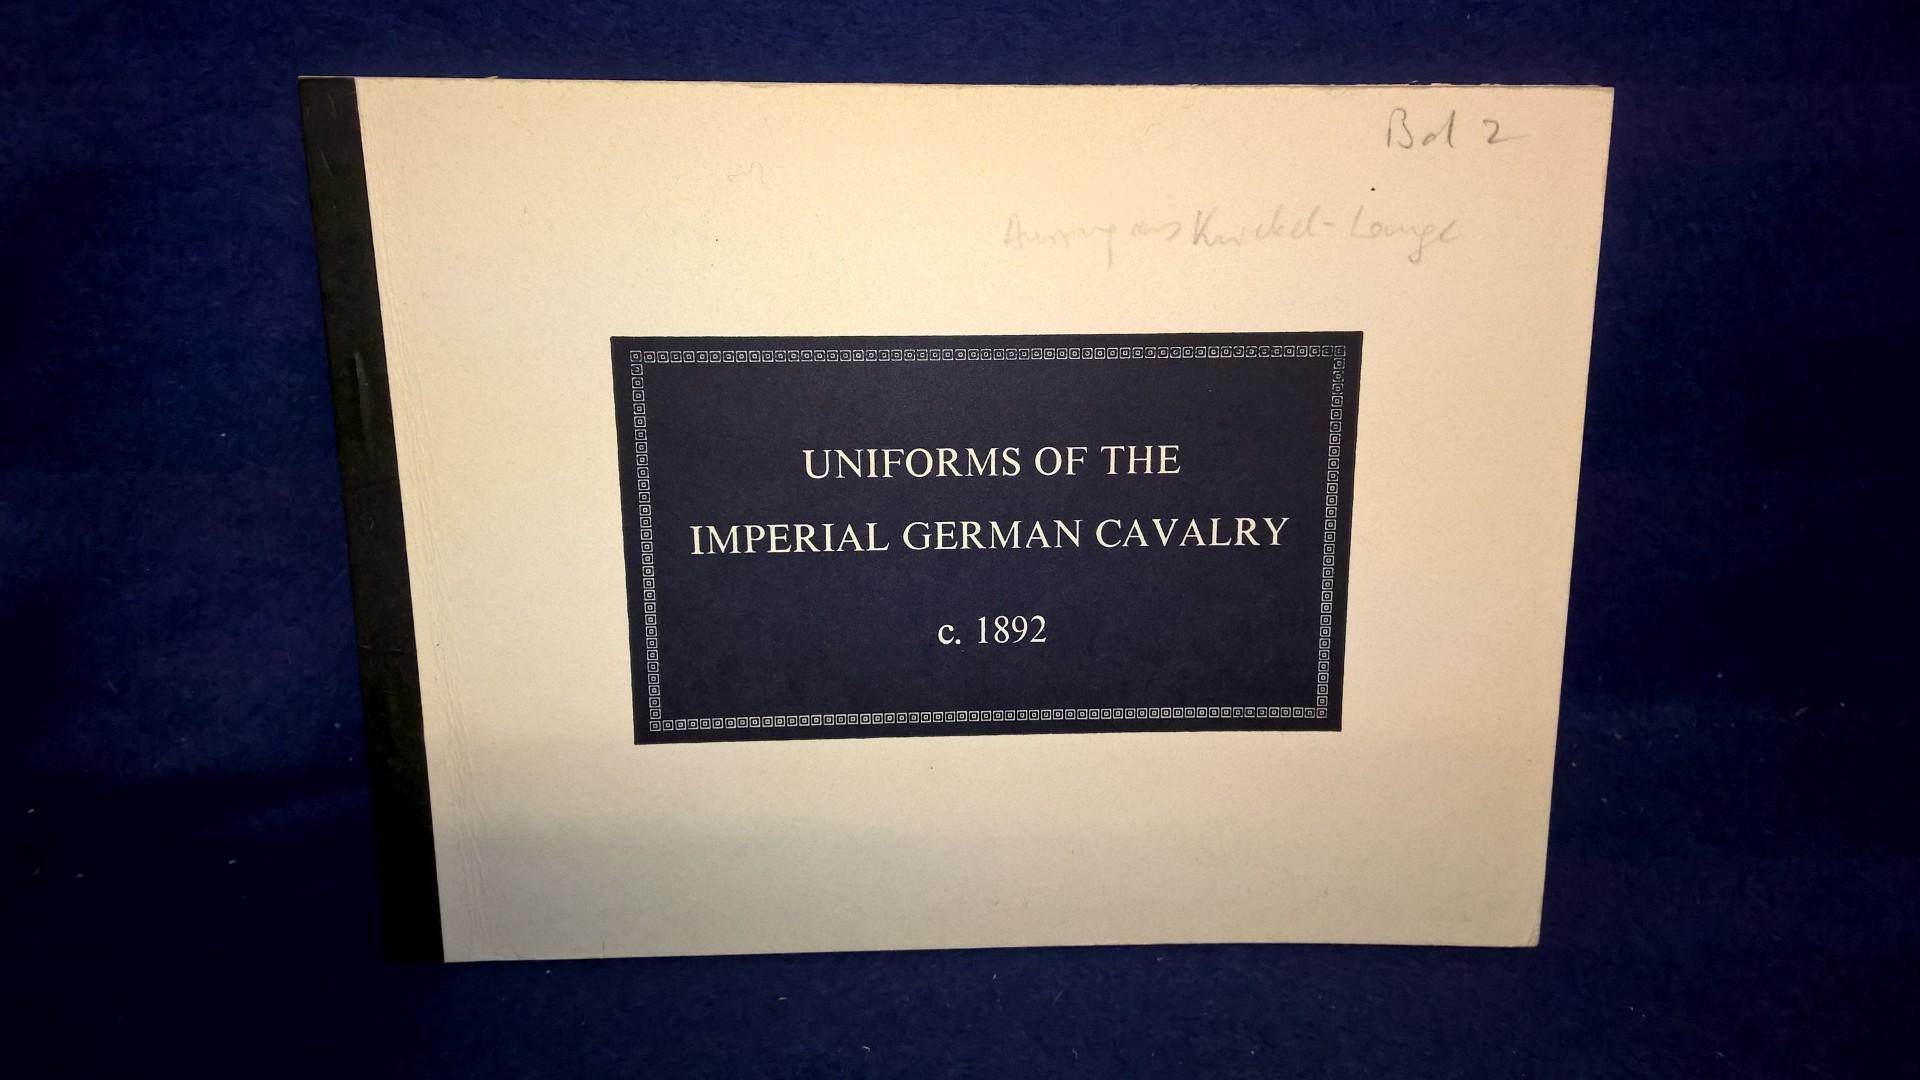 Uniforms of the Imperial German Cavalry.